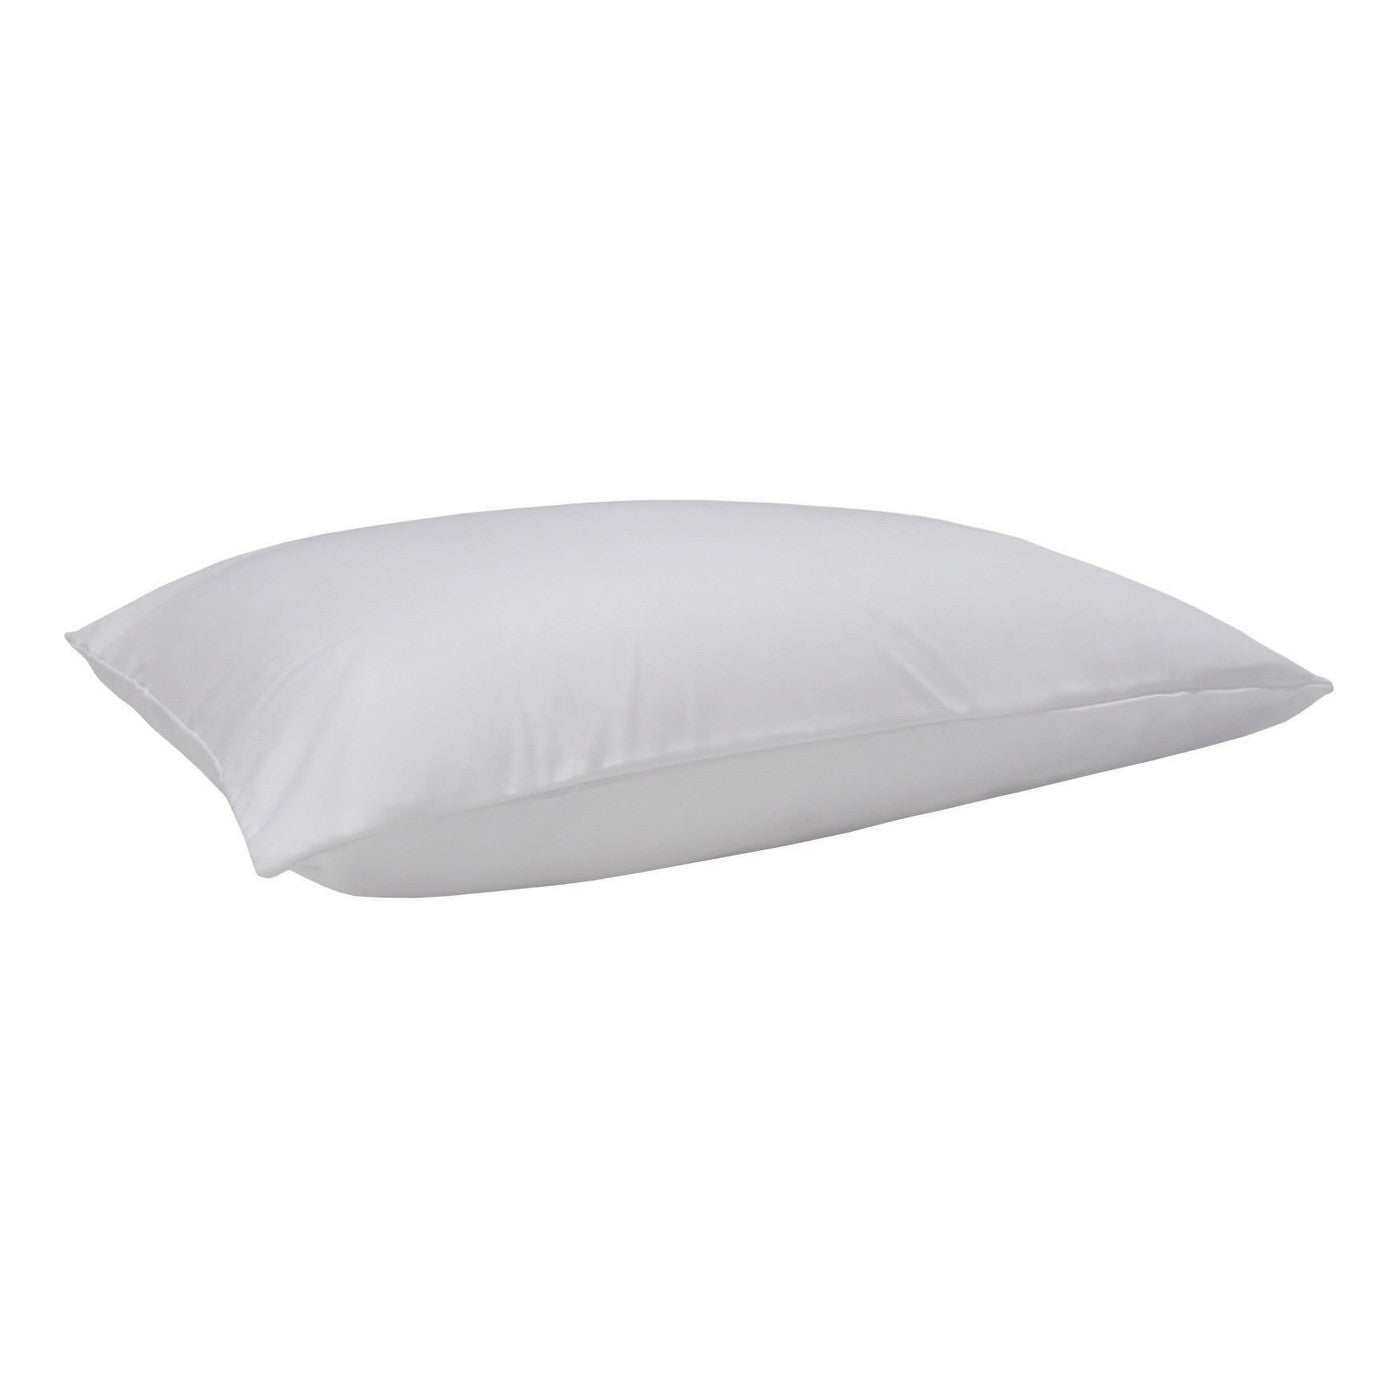 Bedgear iProtect Pillow Protector - Image 2